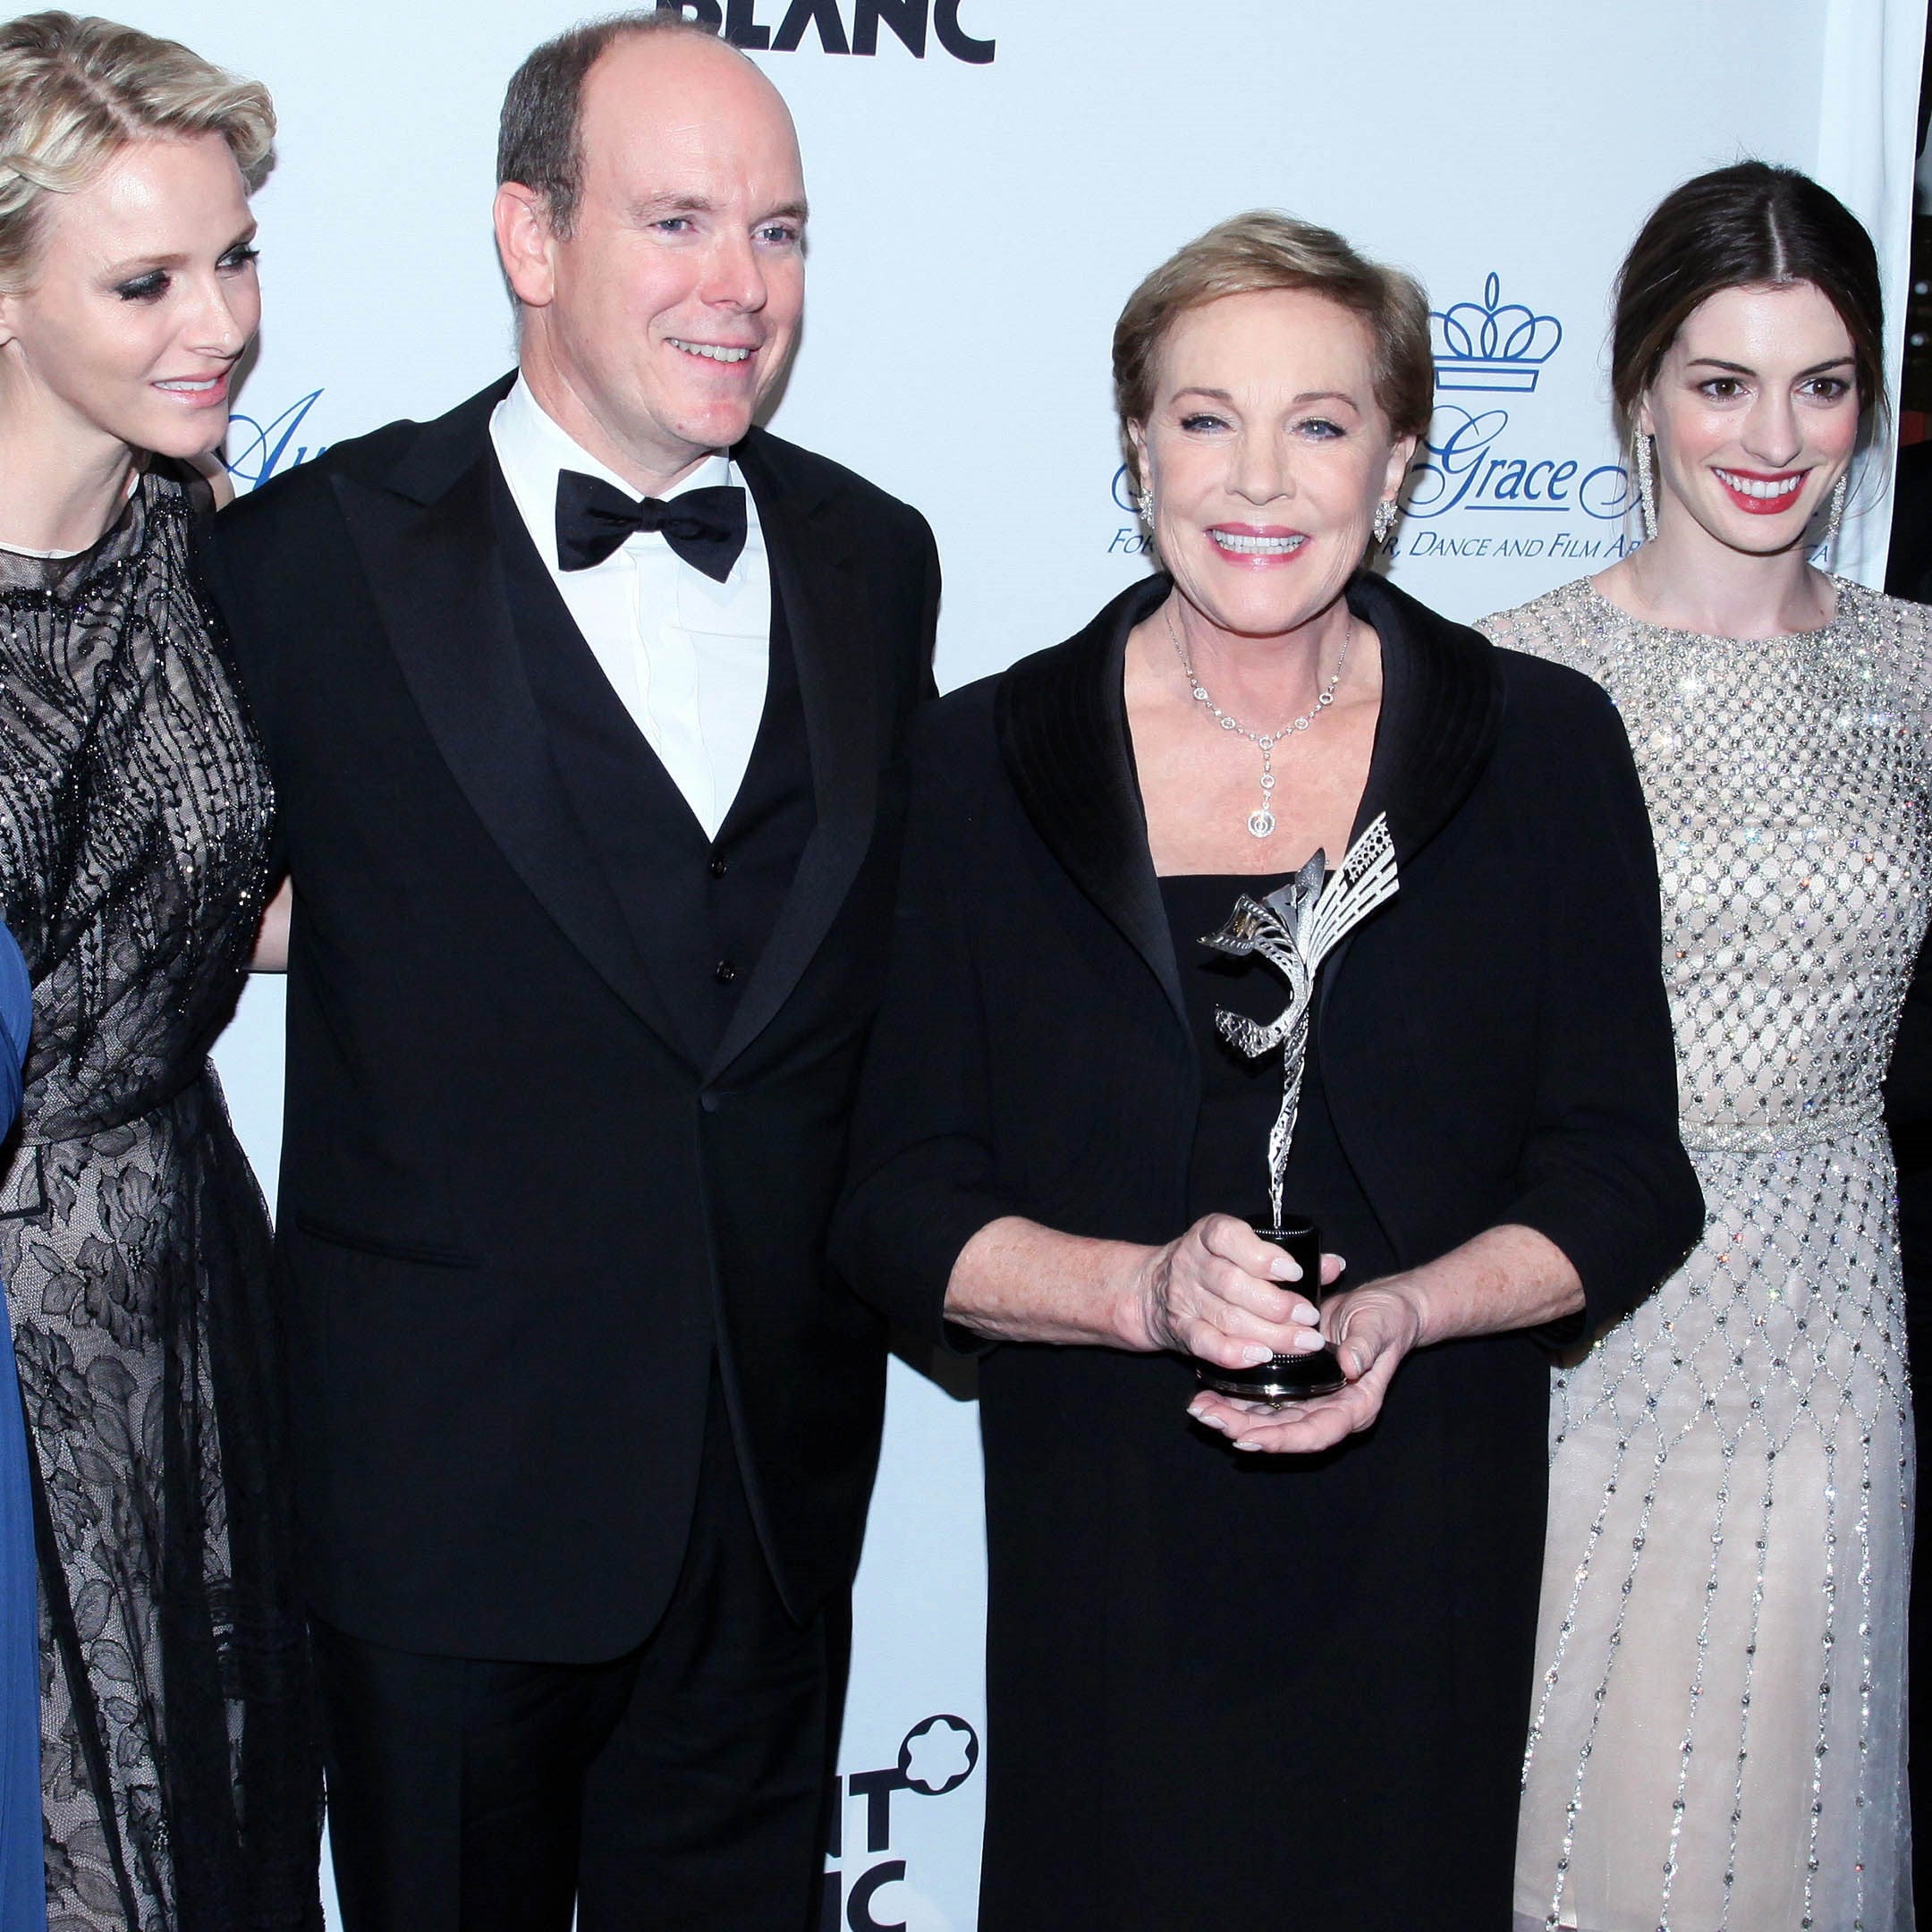 HSH Prince of Monaco and Anne Hathaway present Julie Andrews with Princess Grace Award, designed and created by Alex Soldier.